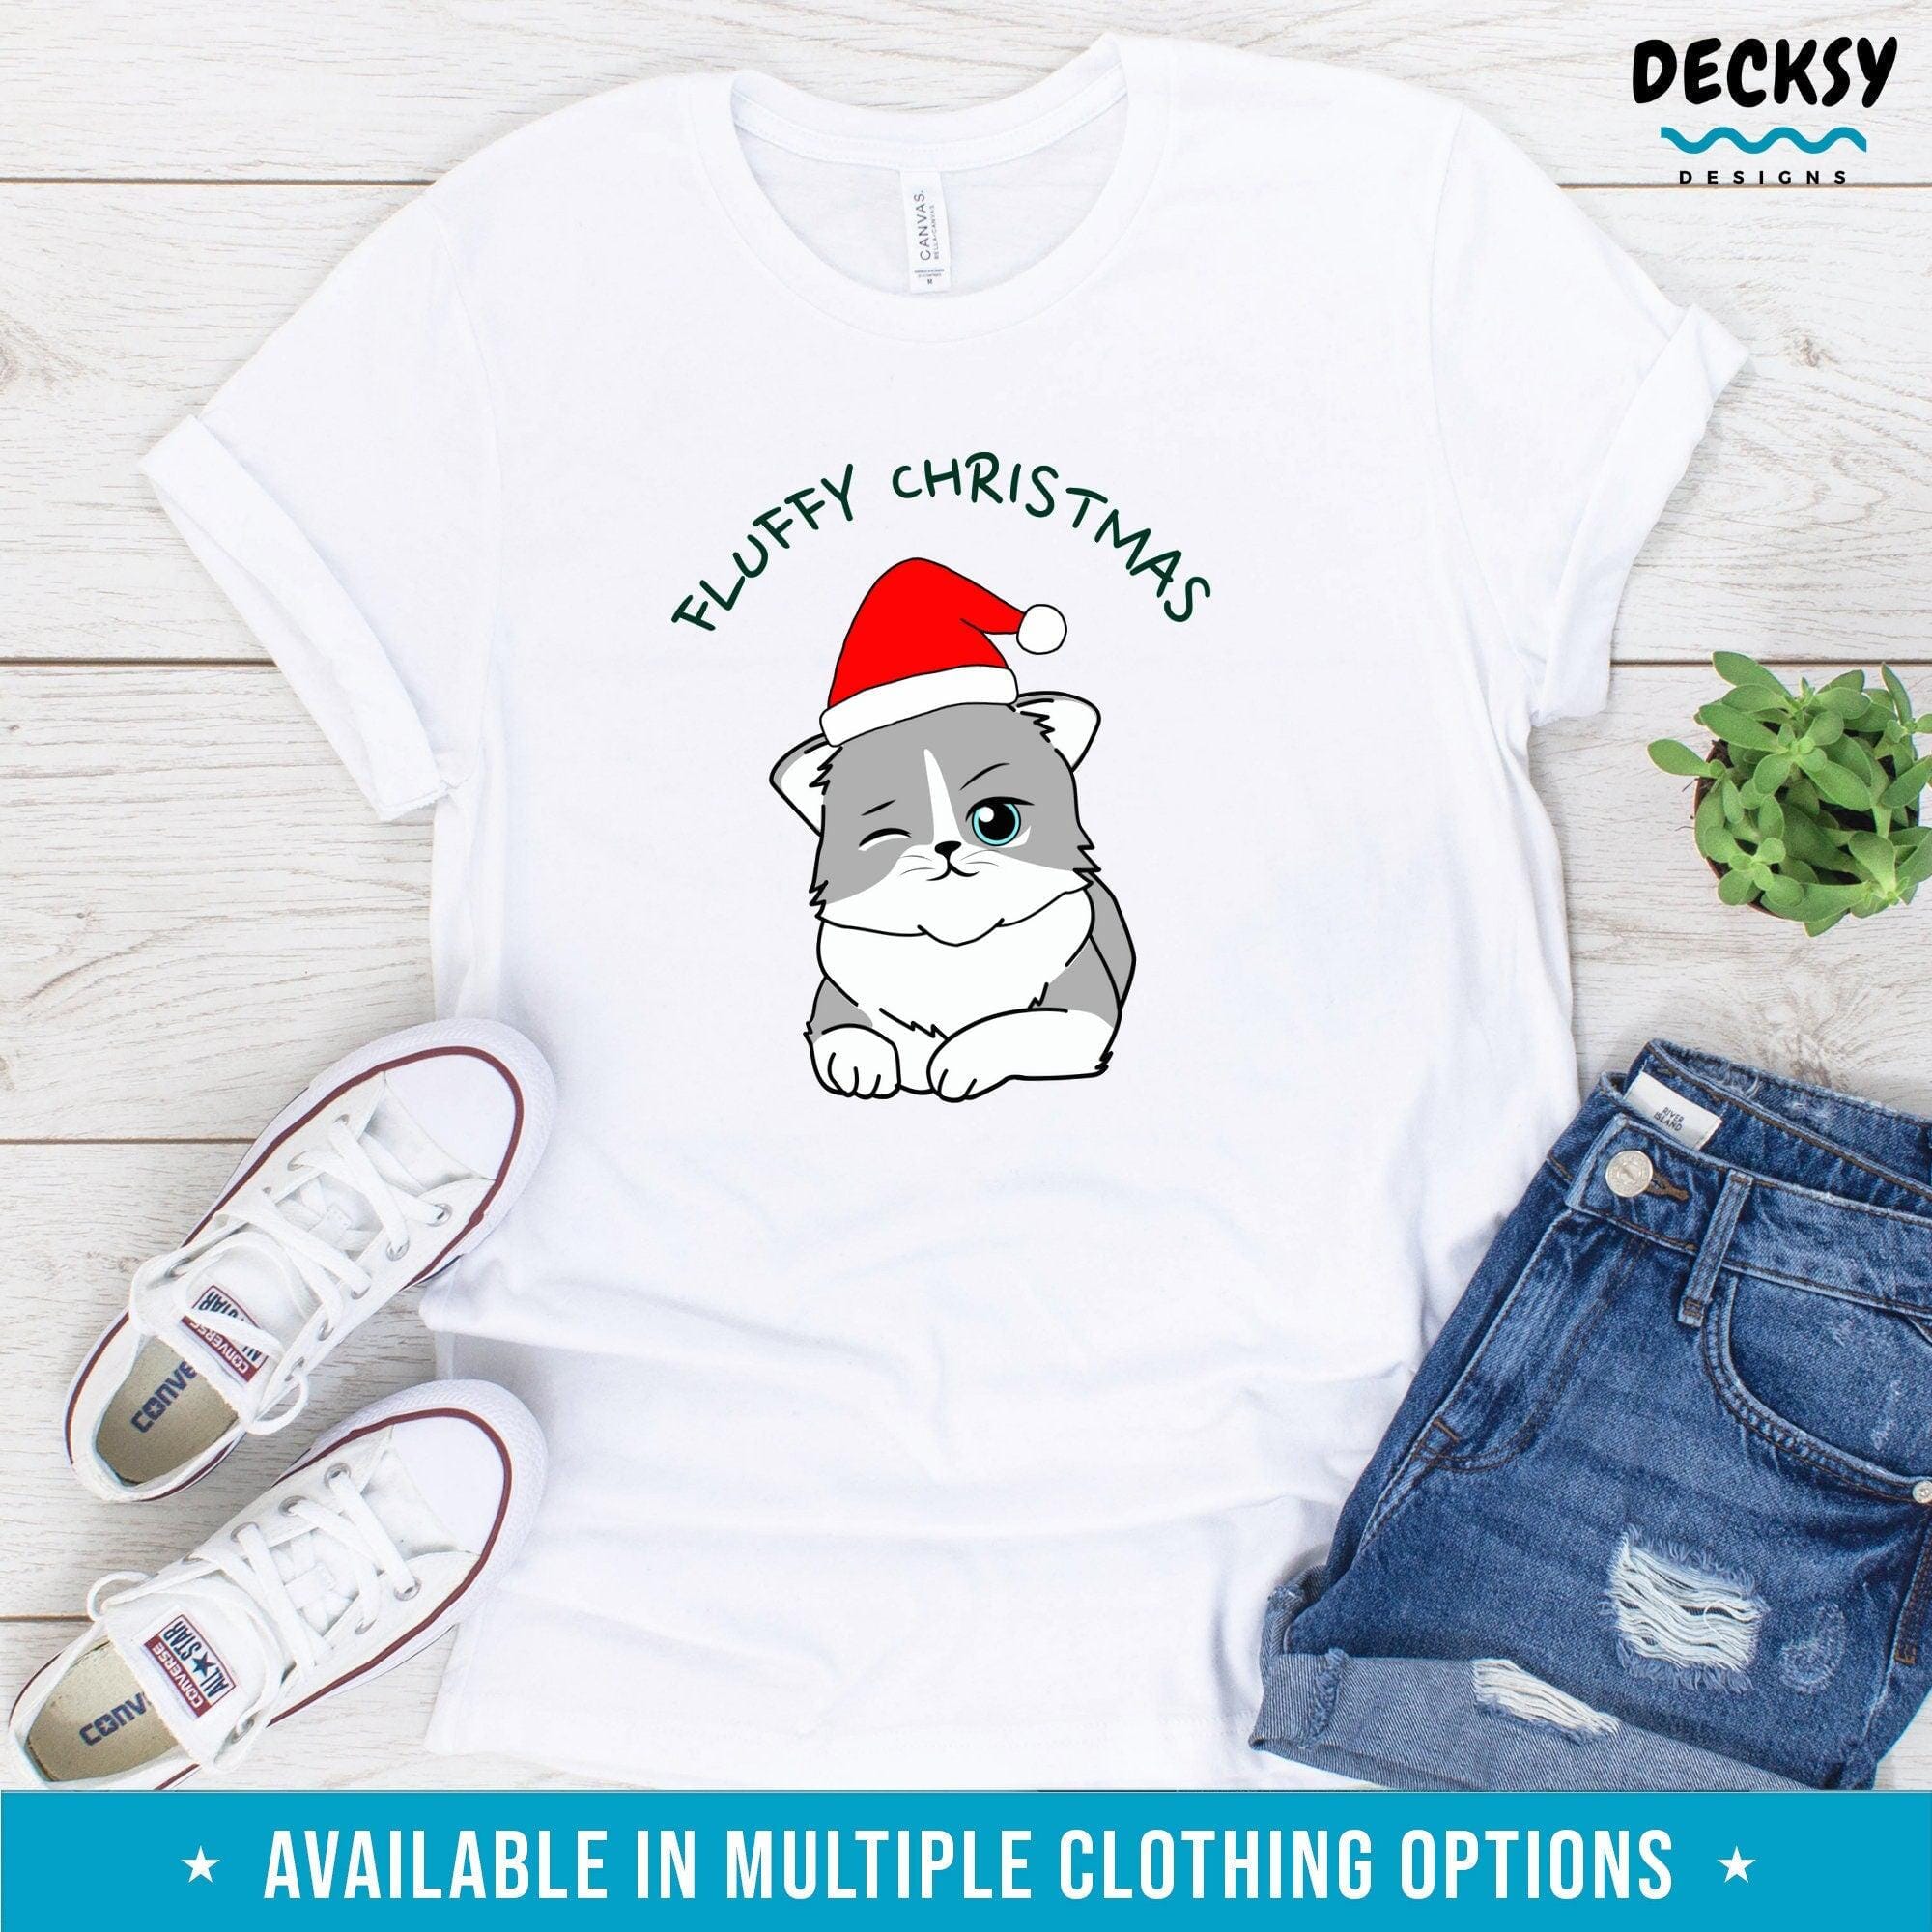 Cat Christmas Shirt, Gift for Cat Lover-Clothing:Gender-Neutral Adult Clothing:Tops & Tees:T-shirts:Graphic Tees-DecksyDesigns